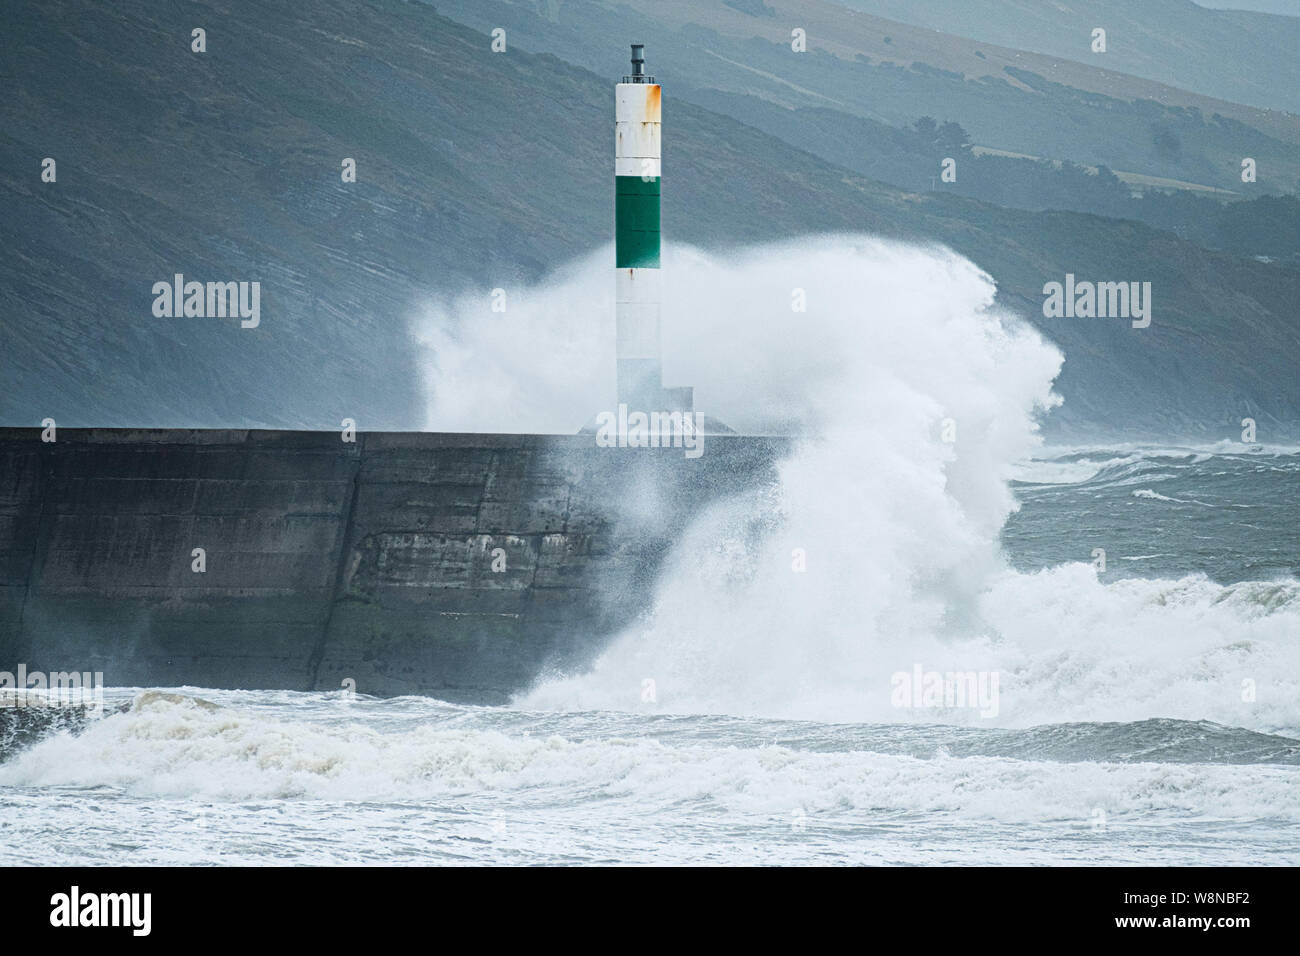 10 Aug 2019 Aberystwyth Wales UK. UK Weather: Gale force winds gusting to over 50mph and stormy seas batter the harbour lighthouse, and makes life difficult for pedestrians in Aberystwyth as unseasonably wet and windy weather sweeps across much of the west of the UK , bringing severe disruption to travel and forcing the cancellation of many outdoor events. Photo credit Keith Morris/Alamy Live News Stock Photo